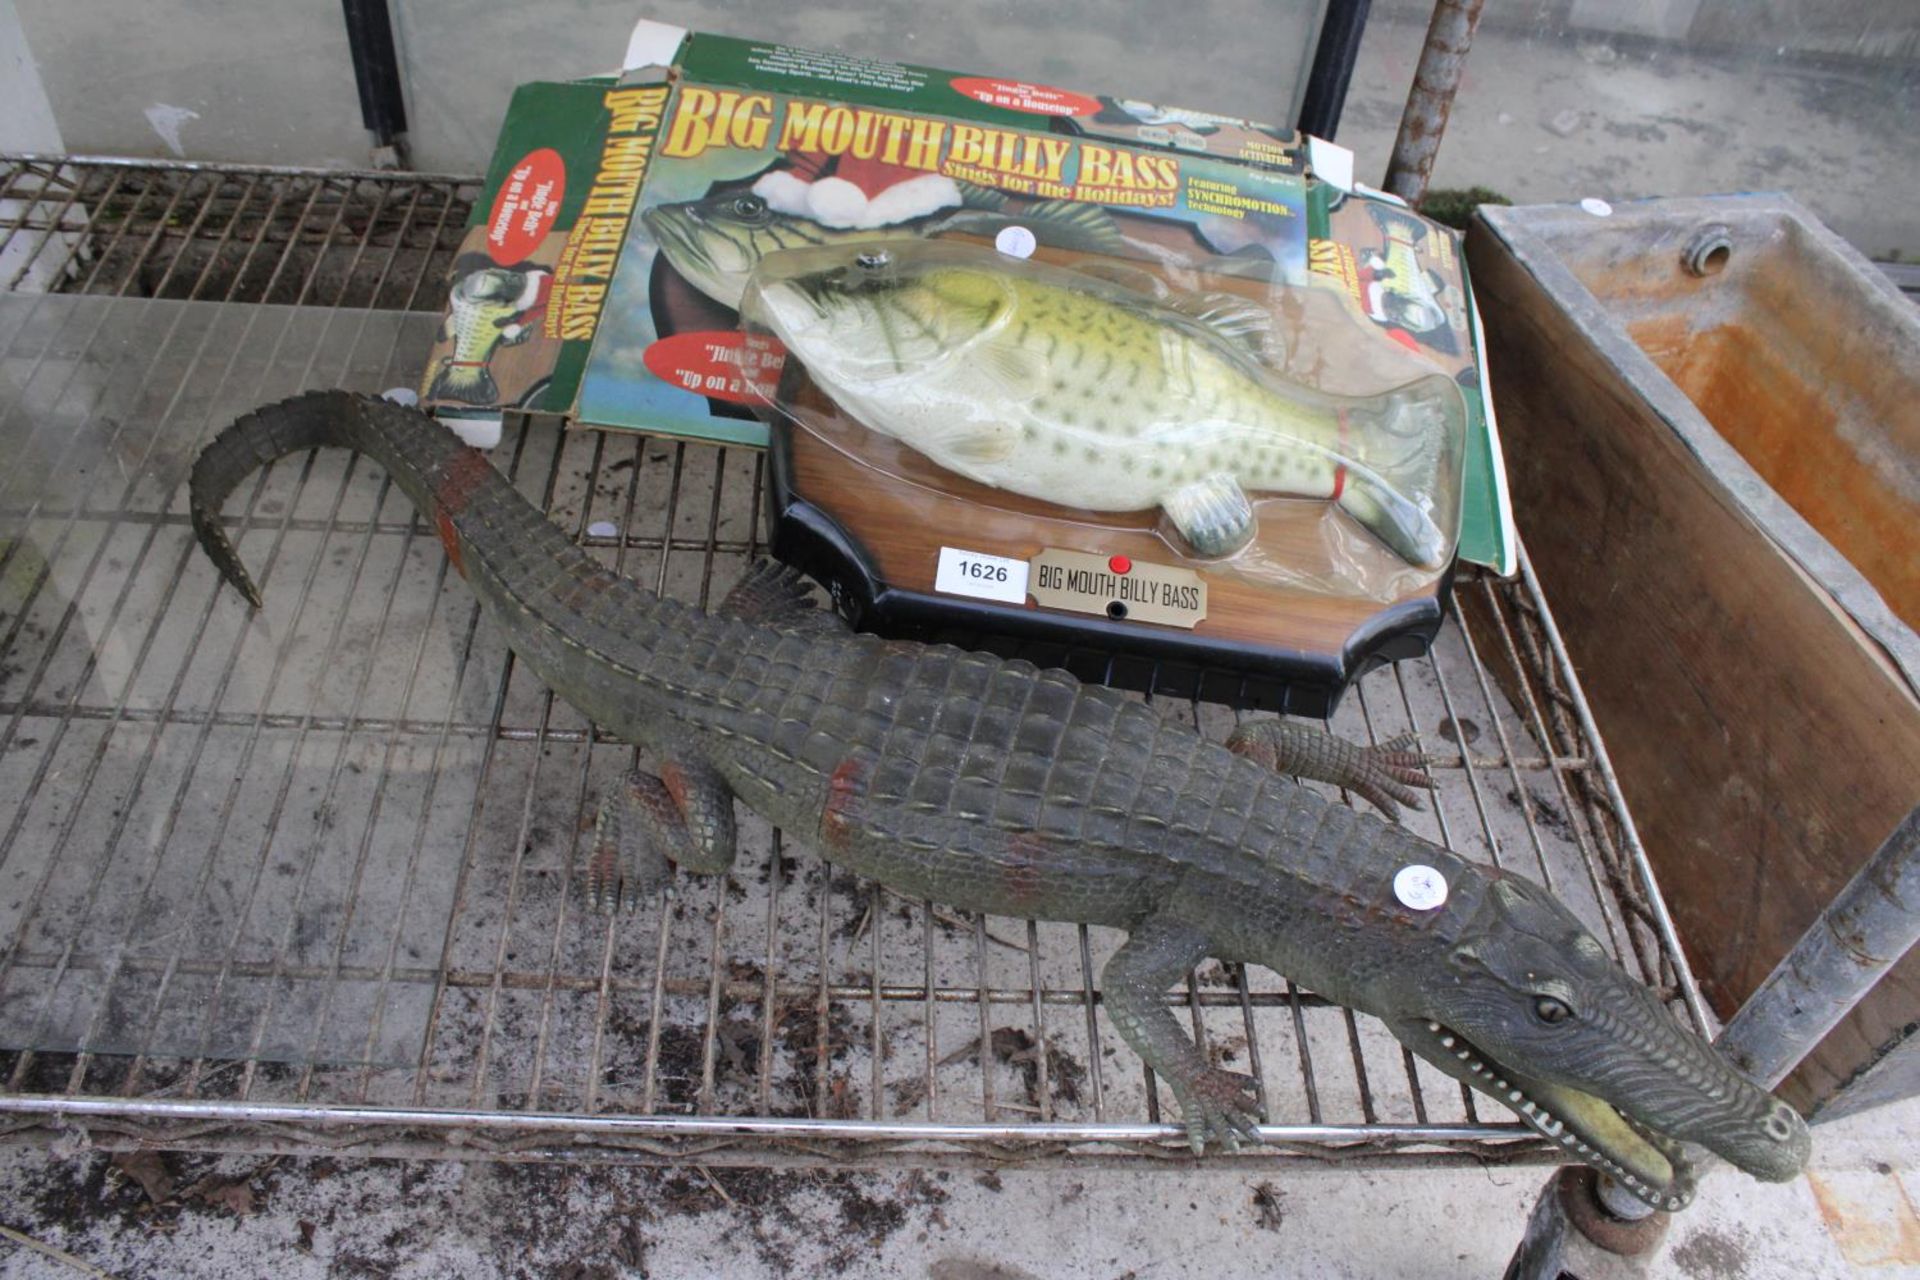 A LARGE PLASTIC ALIGATOR AND AN ELECTRIC BIG MOUTH BILLY BASS